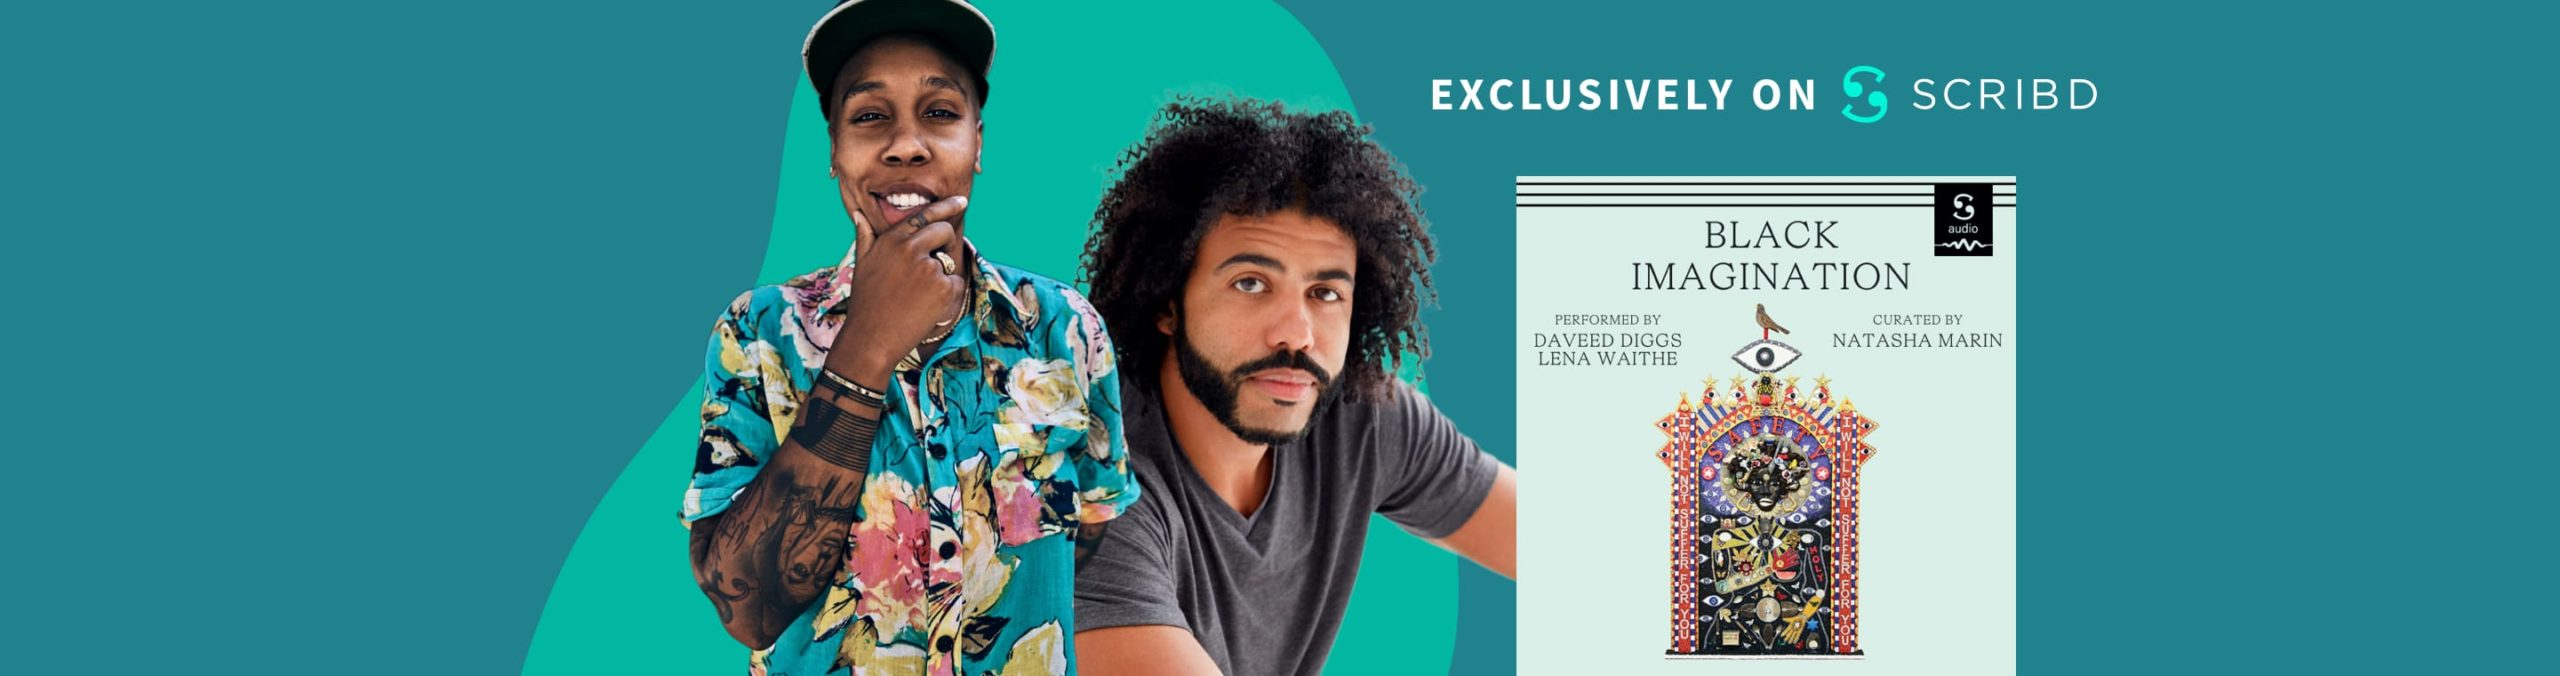 Daveed Diggs and Lena Waithe lend their voices to Scribdâ€™s audiobook version of â€˜Black Imaginationâ€™